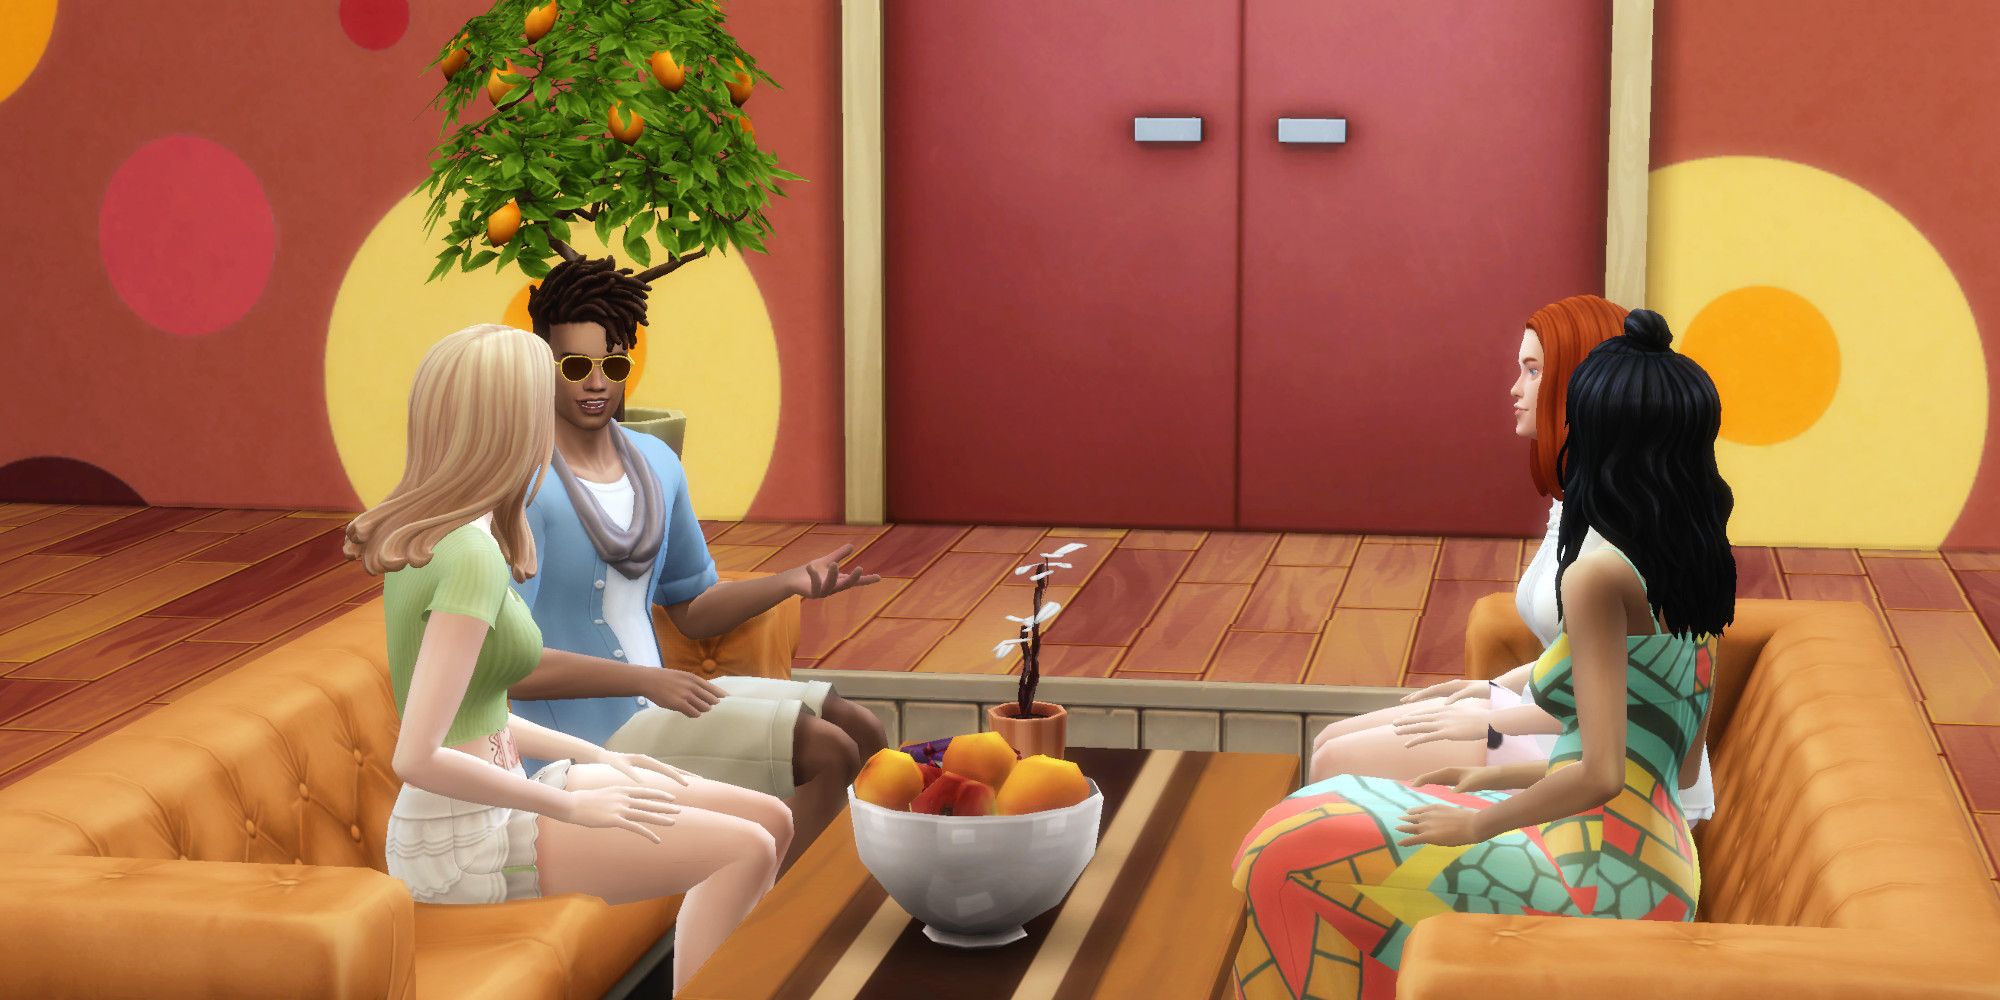 Four Sims from The Sims 4 are talking in a bright room